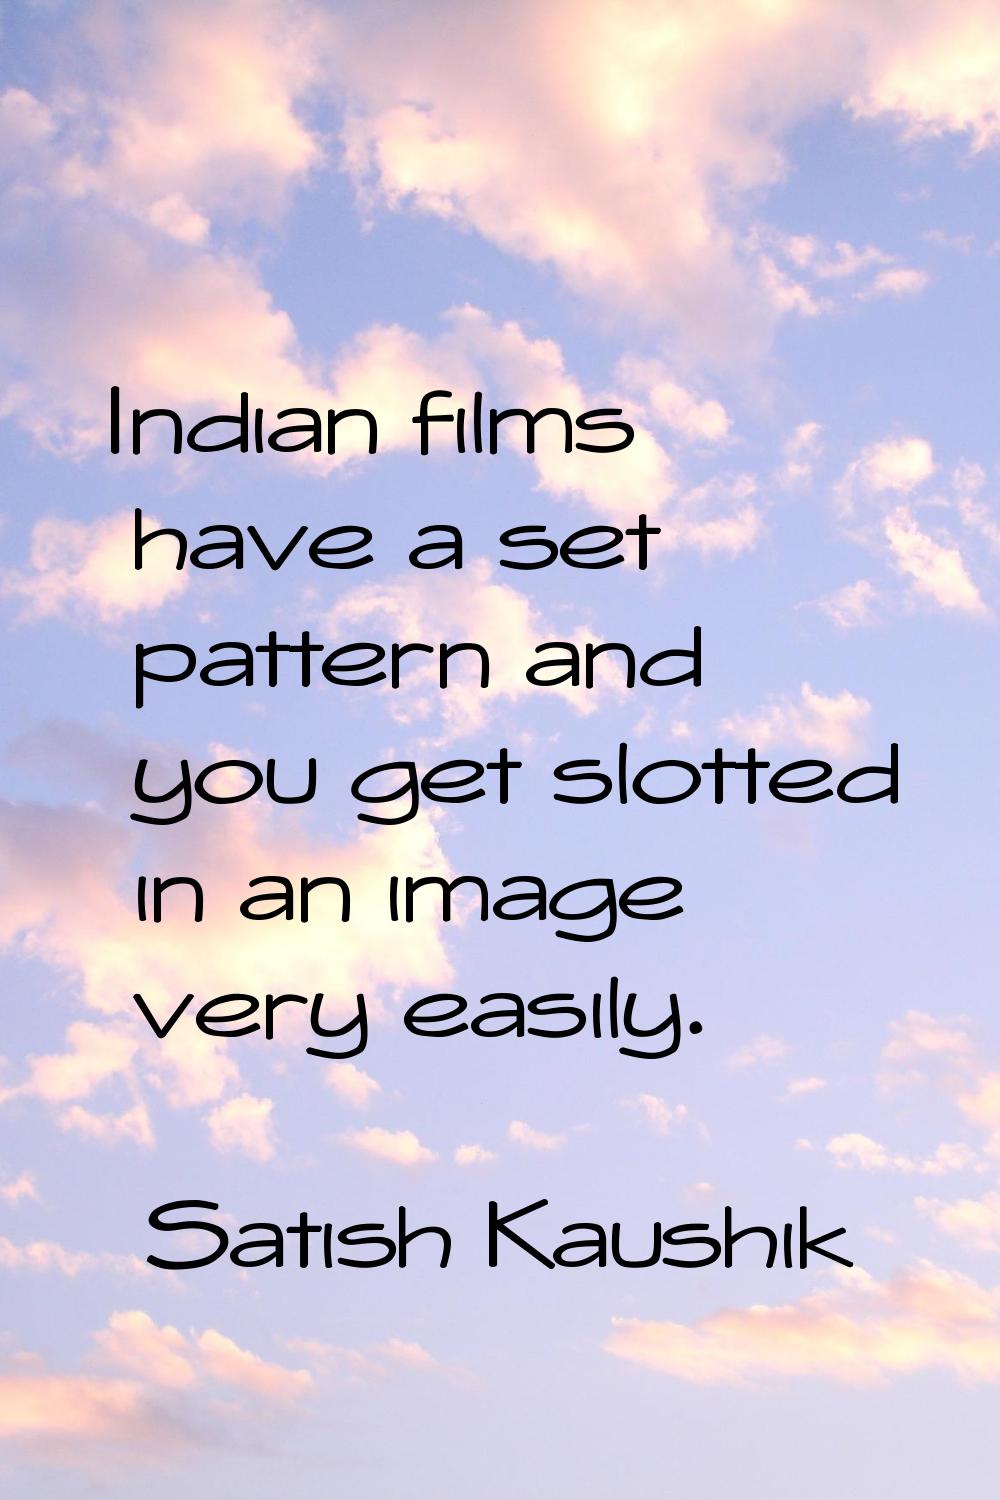 Indian films have a set pattern and you get slotted in an image very easily.